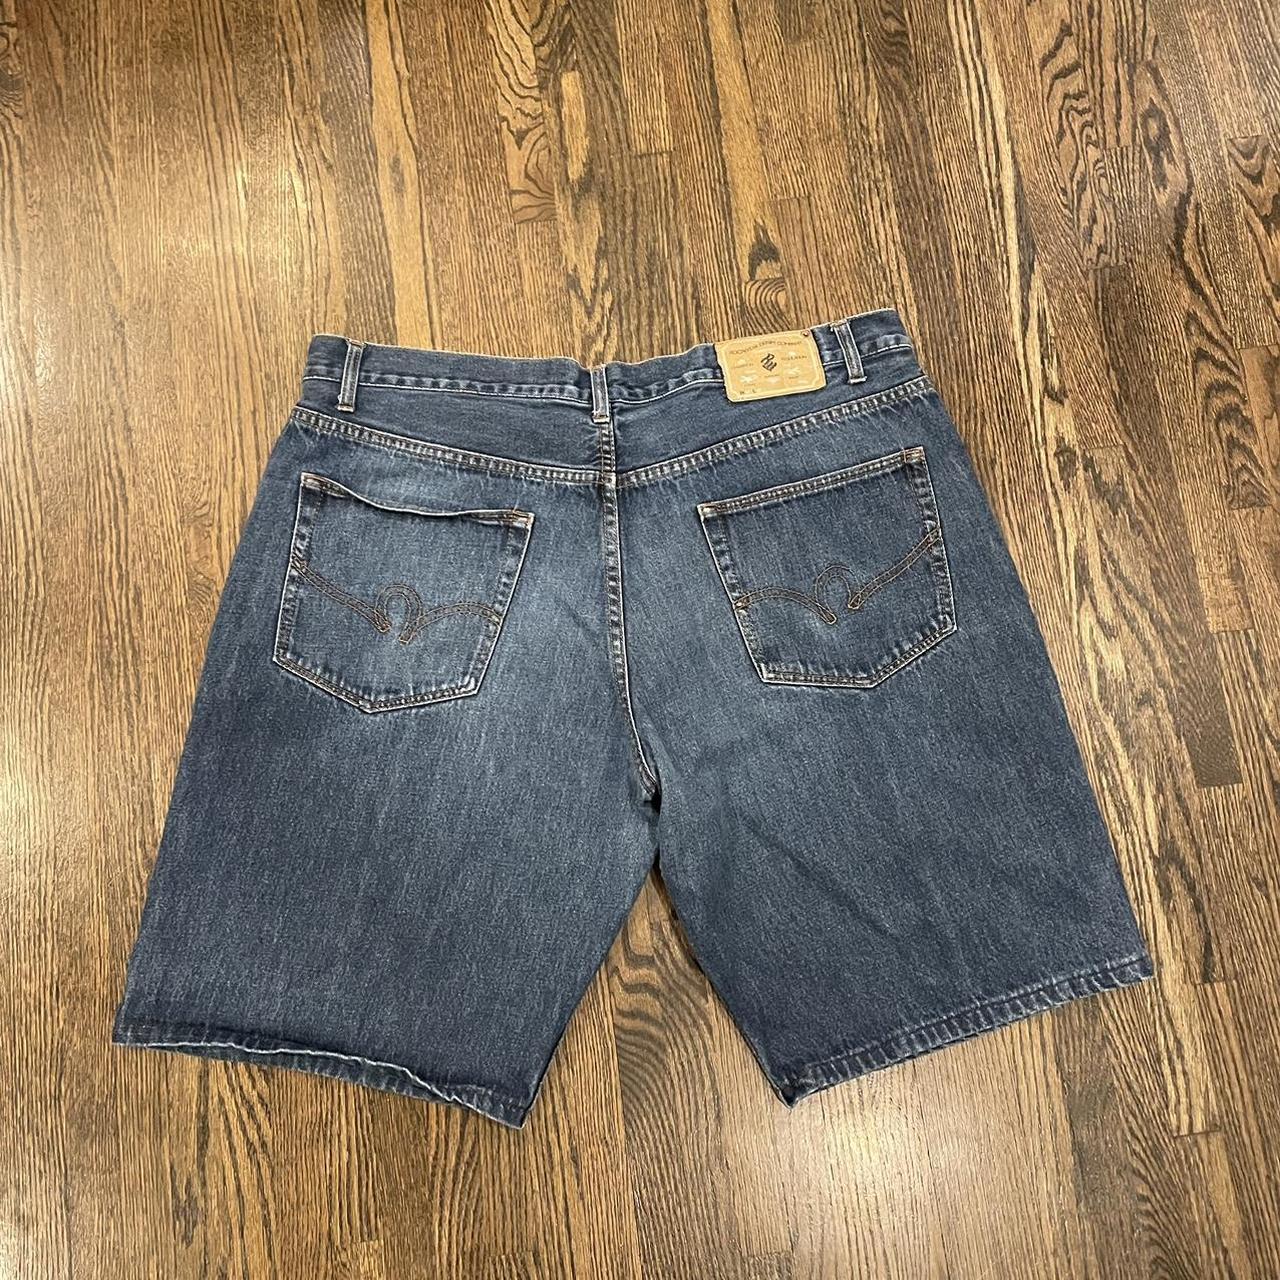 Rocawear Jorts Very baggy with only minor hemming... - Depop